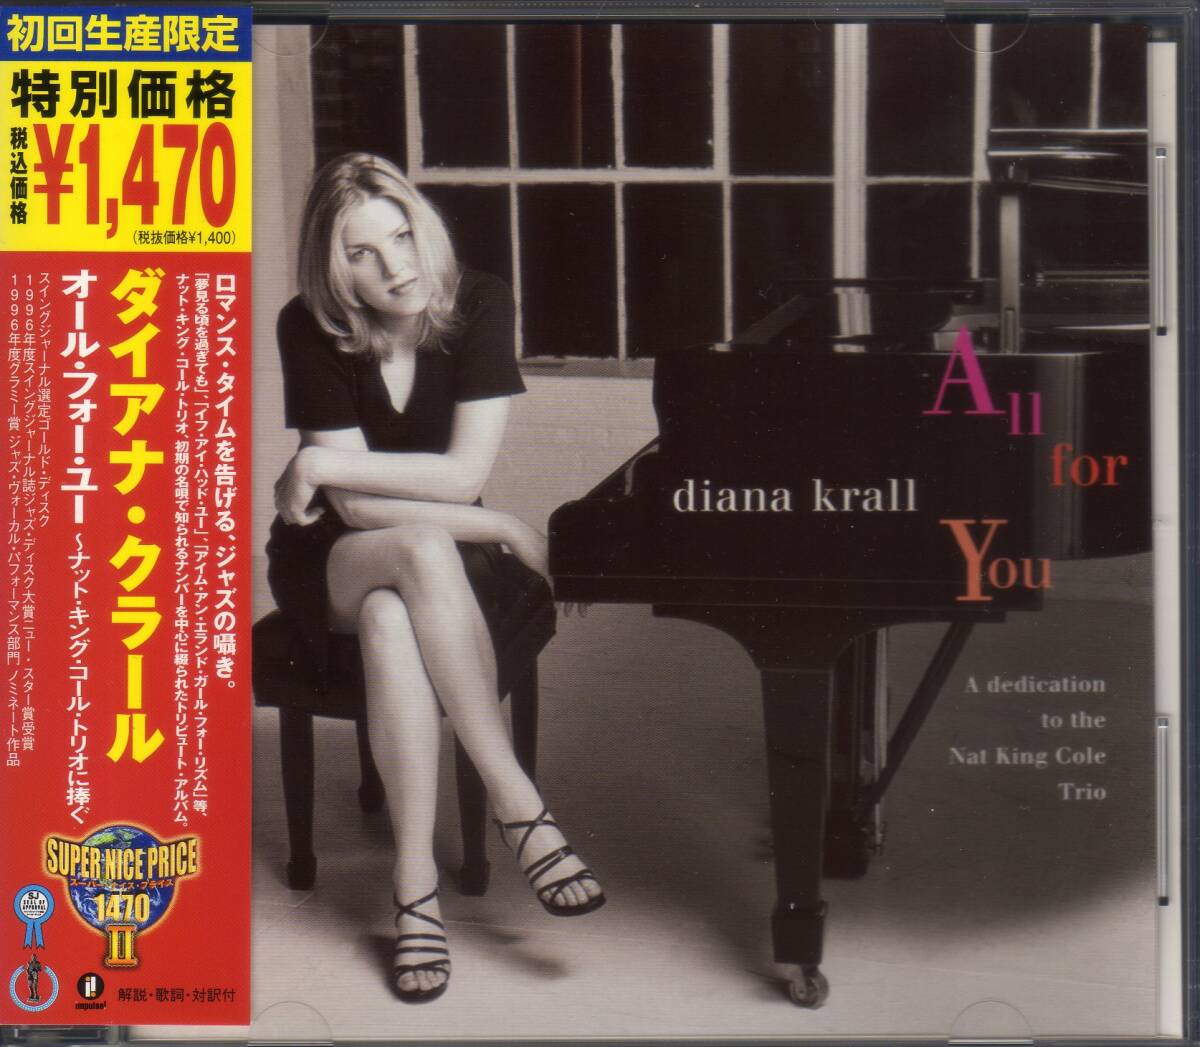 【CD】　ダイアナ・クラール　DIANA KRALL　 / 　All For You 　(A Dedication To The Nat King Cole Trio)_画像1